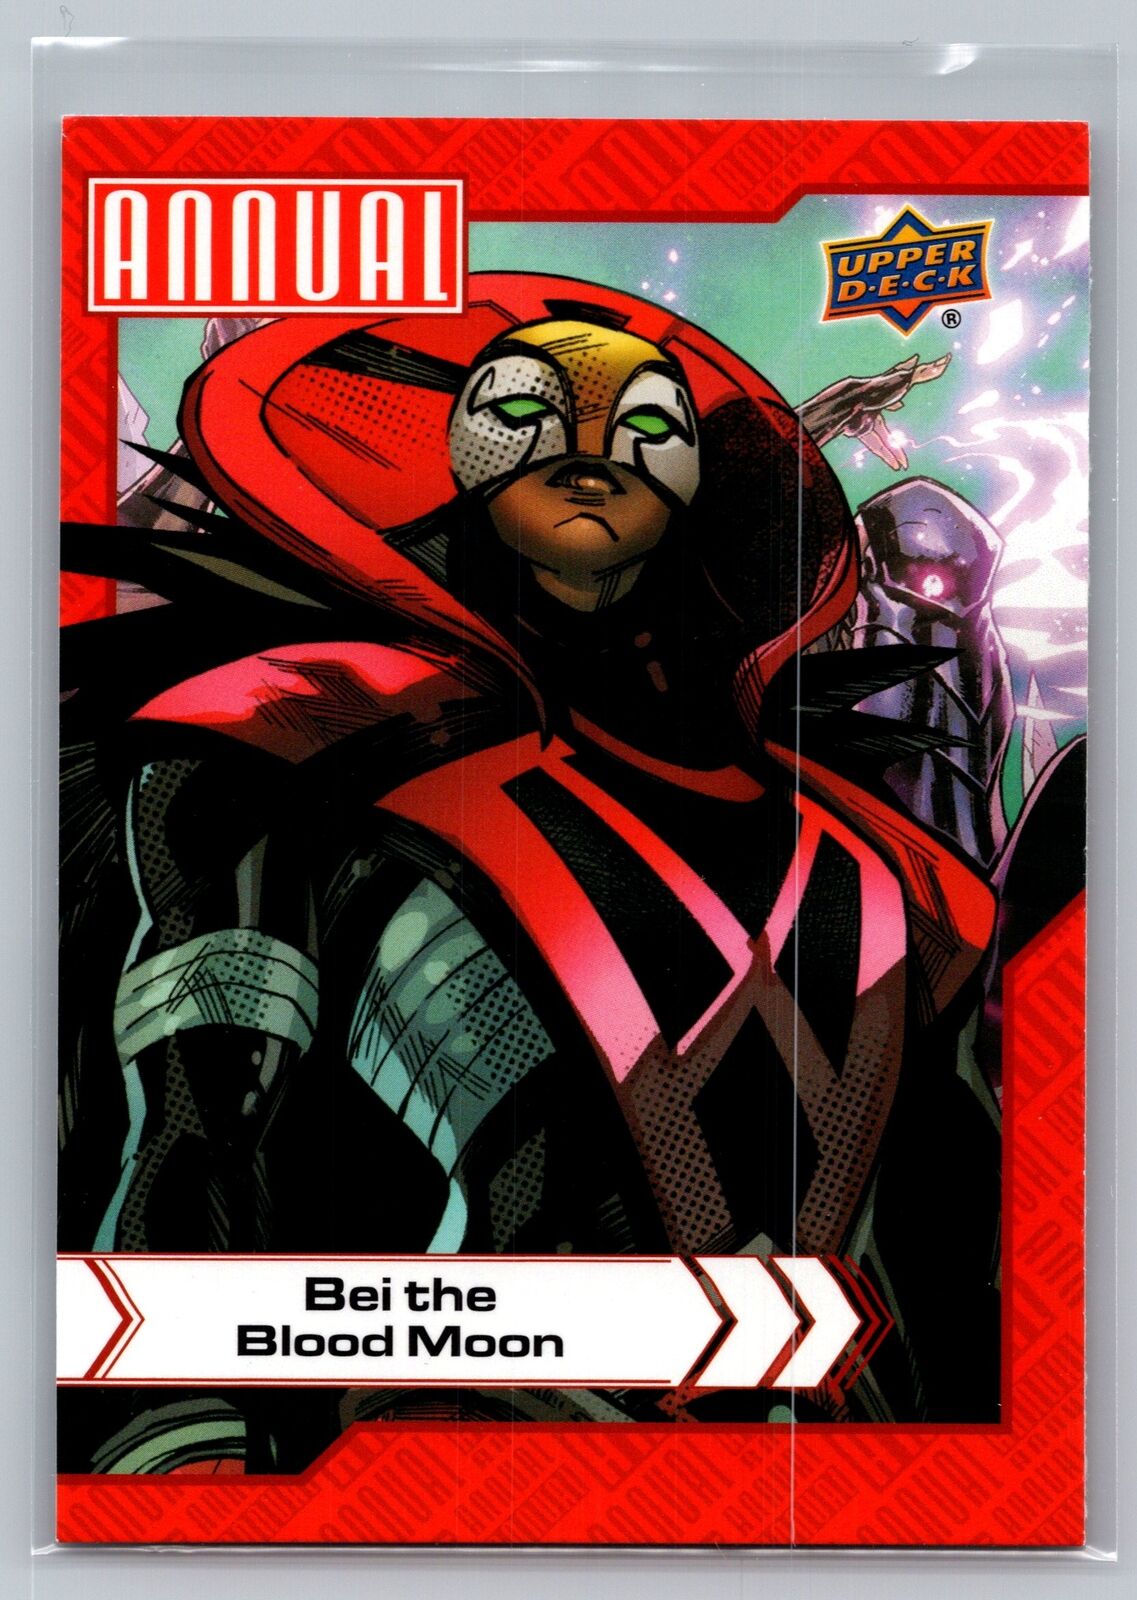 2022-23 Upper Deck Marvel Annual #4 Bei the Blood Moon Base Card